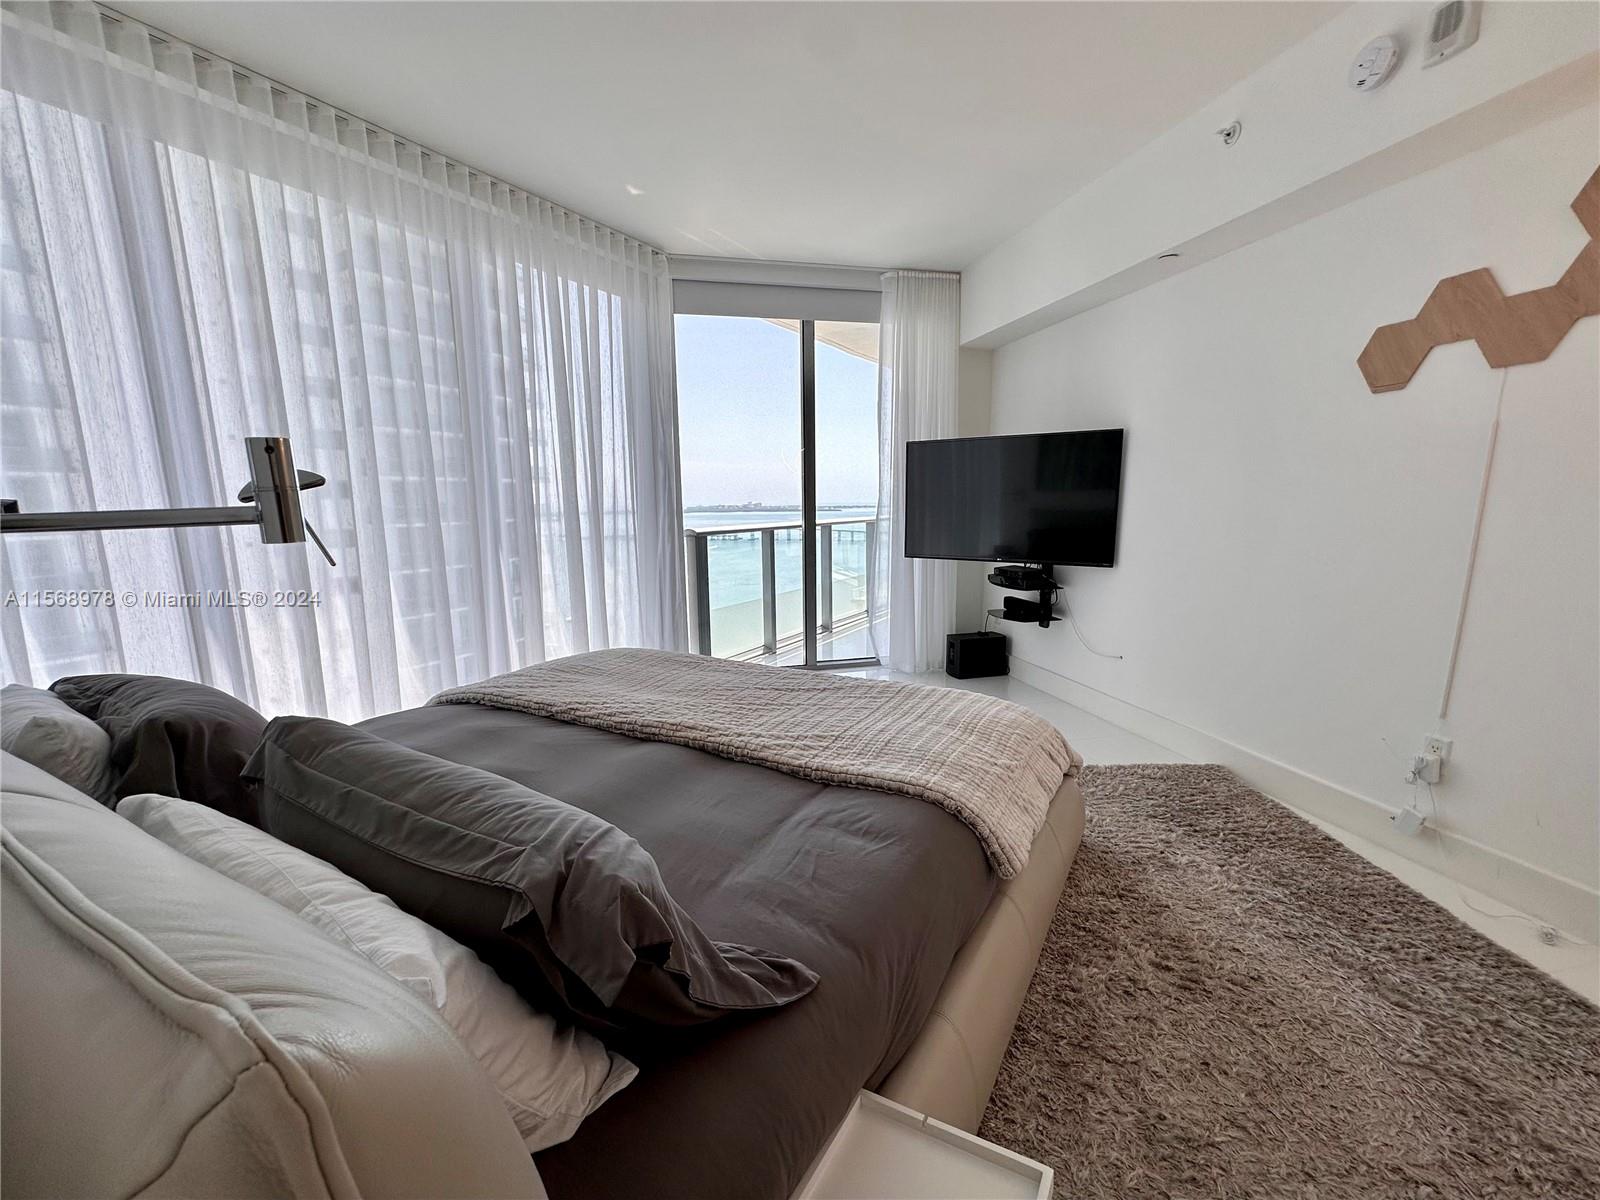 Gorgeous 3-Bed, 2.5 Bath corner unit in the vibrant neighborhood of Brickell!
Enjoy striking views of the Biscayne Bay and Miami Skyline views. 
Brickell House is a 46-story condo building that offers State-of-the-art amenities: modern gym, spa, cabana pool, theater room, kids room,  roof-top pool with unobstructed bay & ocean views, 24 HR valet & concierge. Prime location, proximity to Bars, Restaurants, and Shops.
UNIT IS AVAILABLE UNTIL DECEMBER 2024